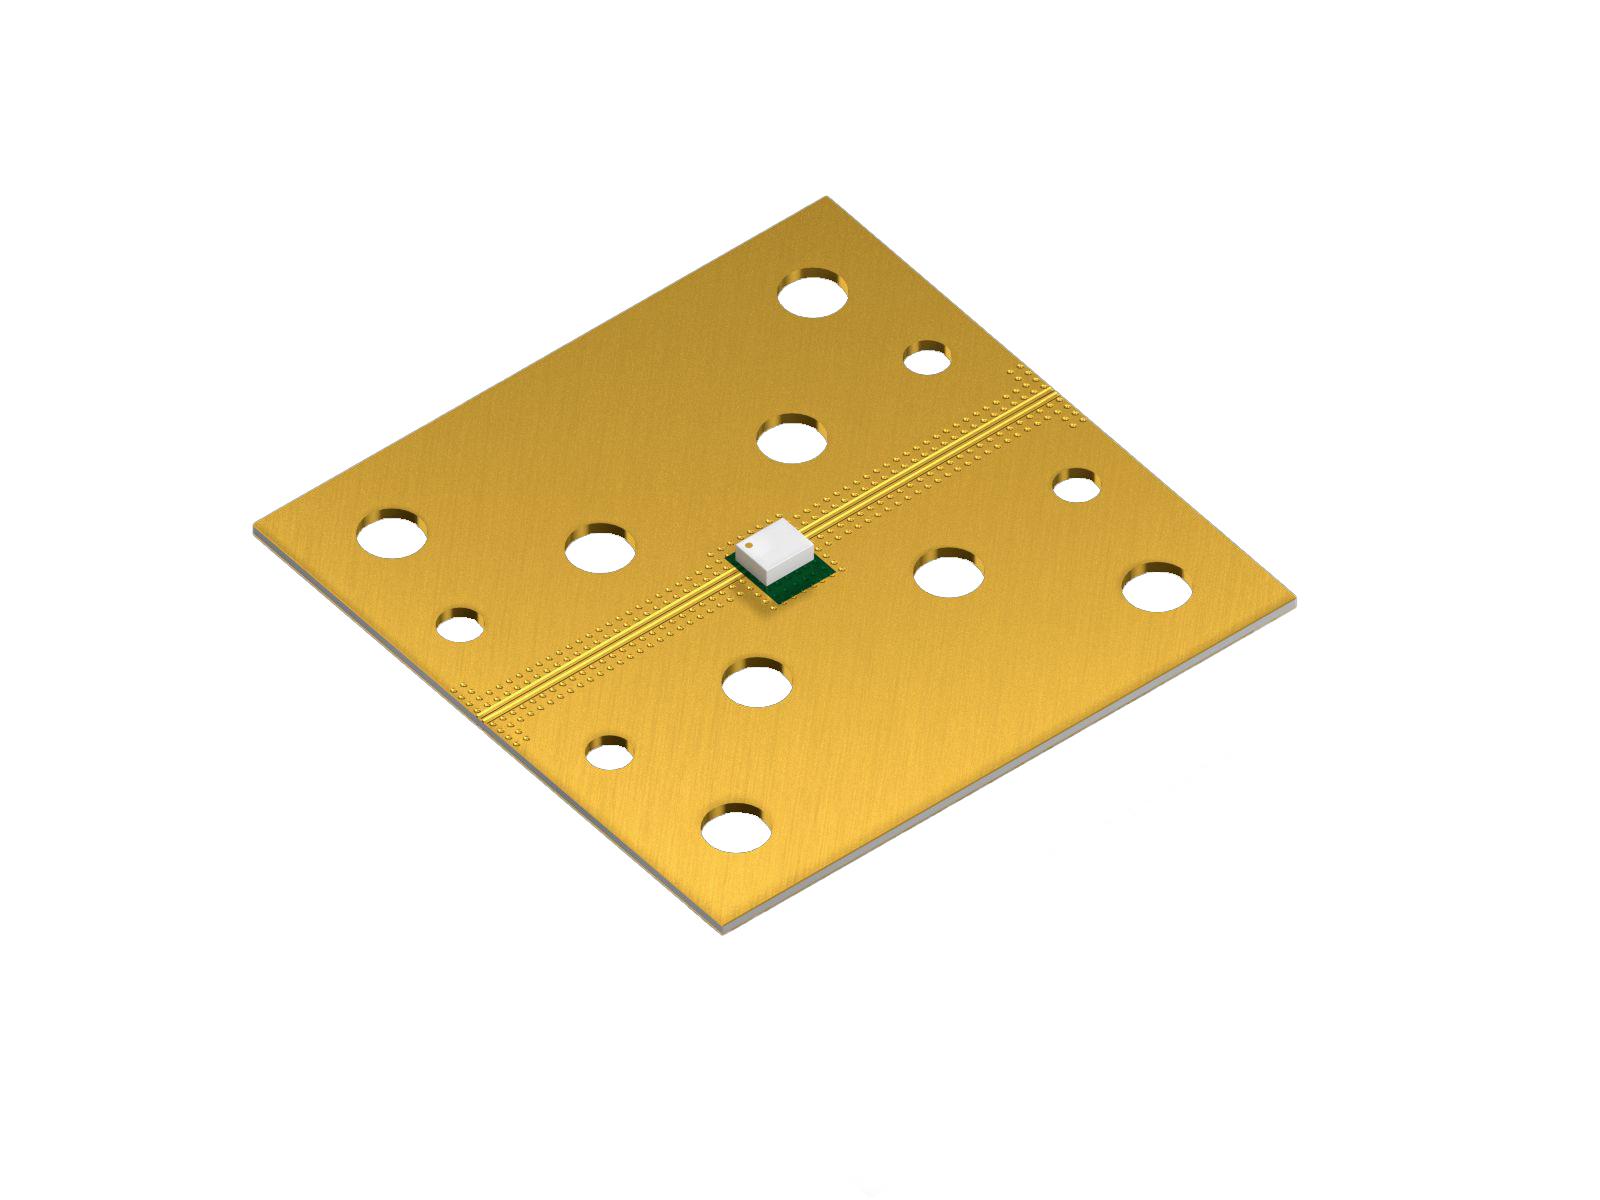 the part number is MMCB3525G8T-0042A1 SAMPLE WITH TEST BOARD